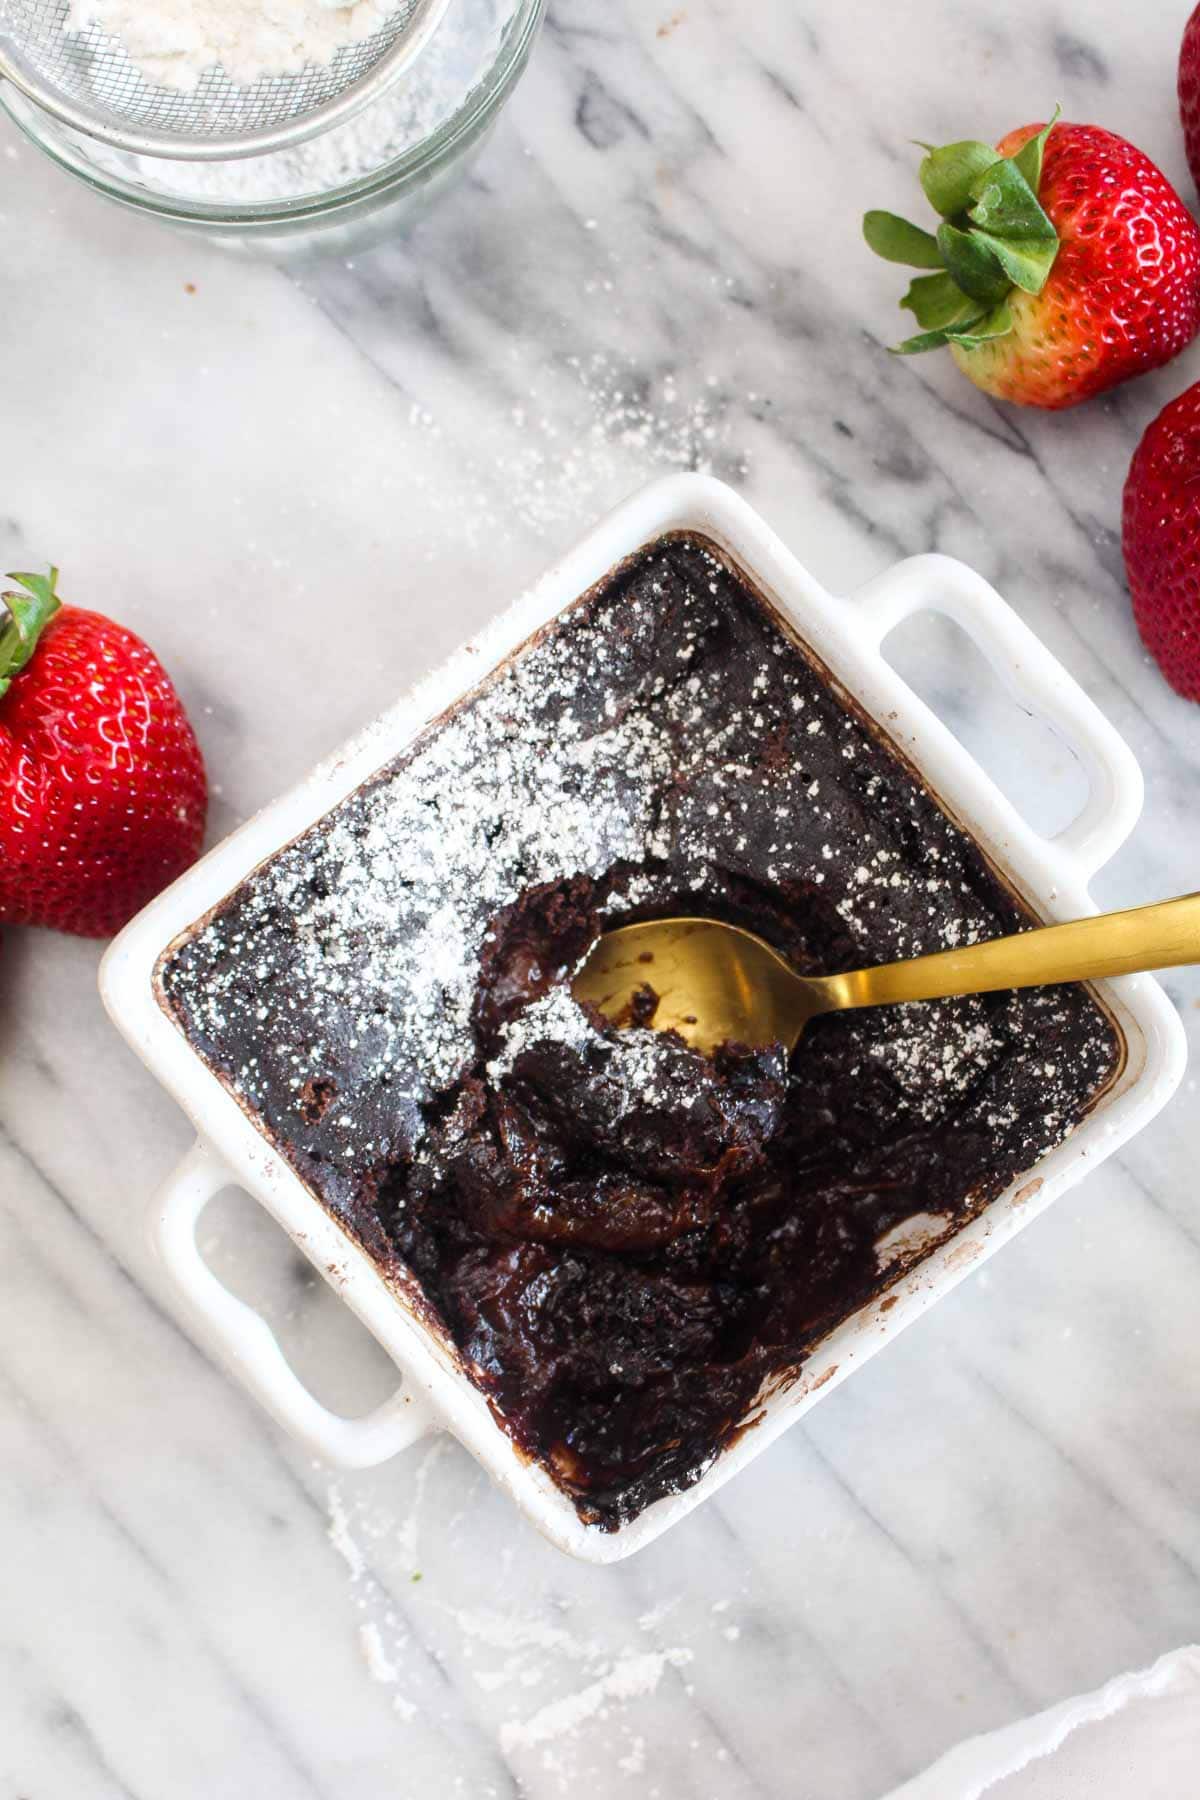 Sweet Potato Hot Fudge Cake is the ultimate chocolate lover's dessert! It makes it's own hot fudge sauce as it bakes. This healthier recipe is gluten free, vegan, and oil free. | CatchingSeeds.com